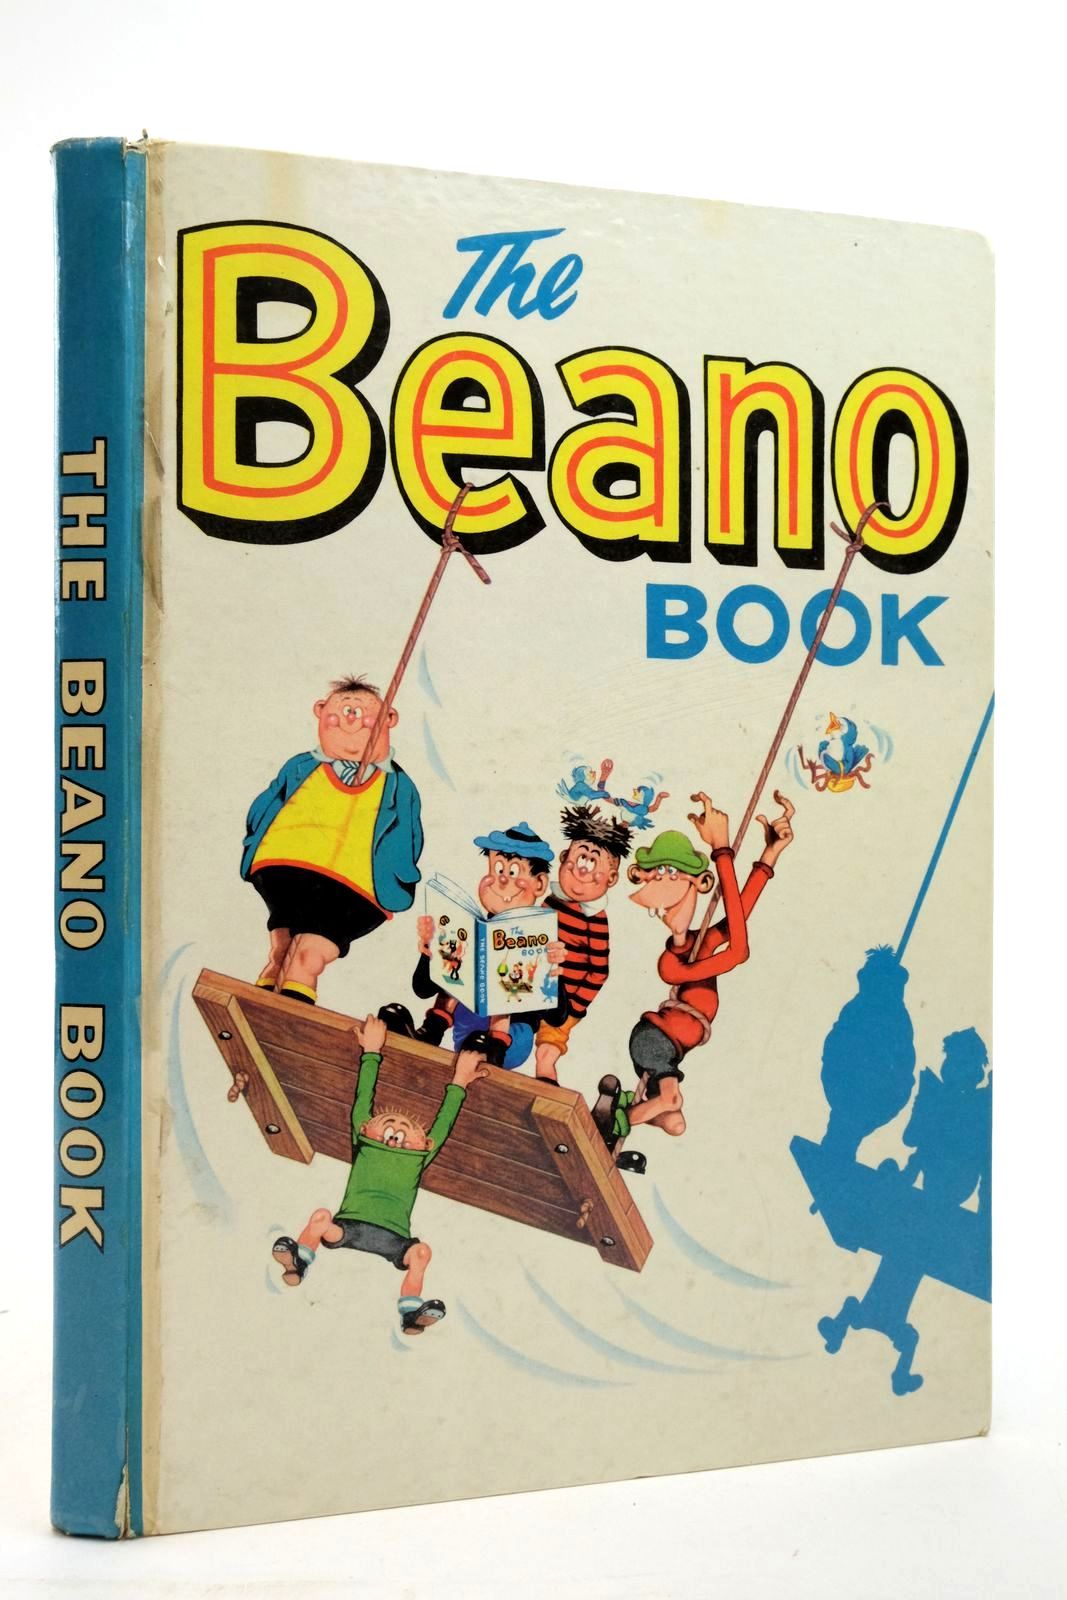 Photo of THE BEANO BOOK 1963 published by D.C. Thomson &amp; Co Ltd. (STOCK CODE: 2137177)  for sale by Stella & Rose's Books